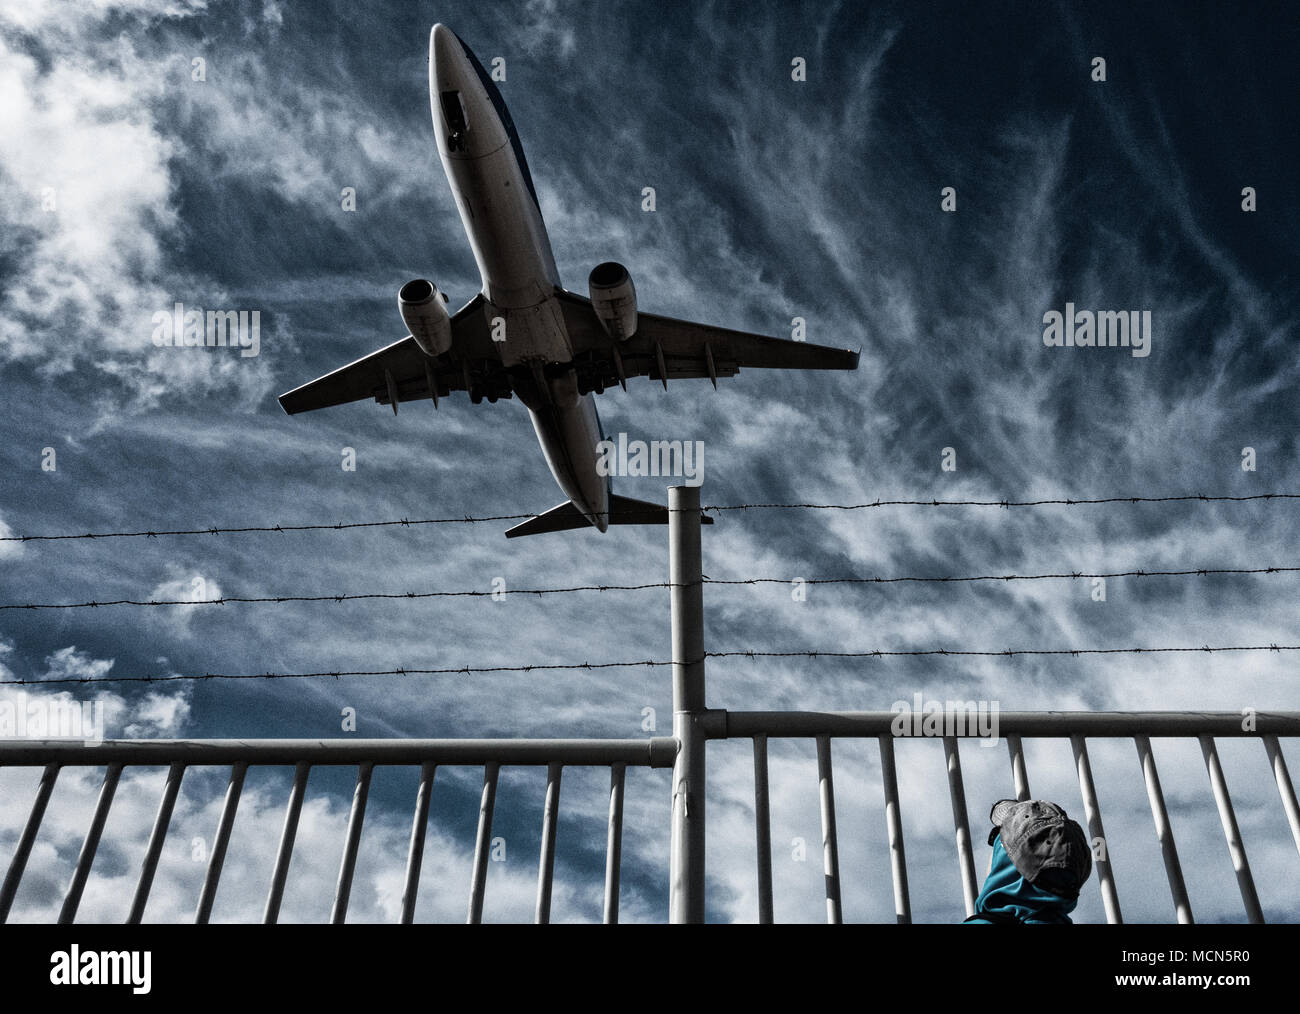 Woman watching aircraft/airplane from behind barbed wire perimeter, border fence. Concept image: Russia Ukraine conflict, no fly zone, refugee crisis. Stock Photo